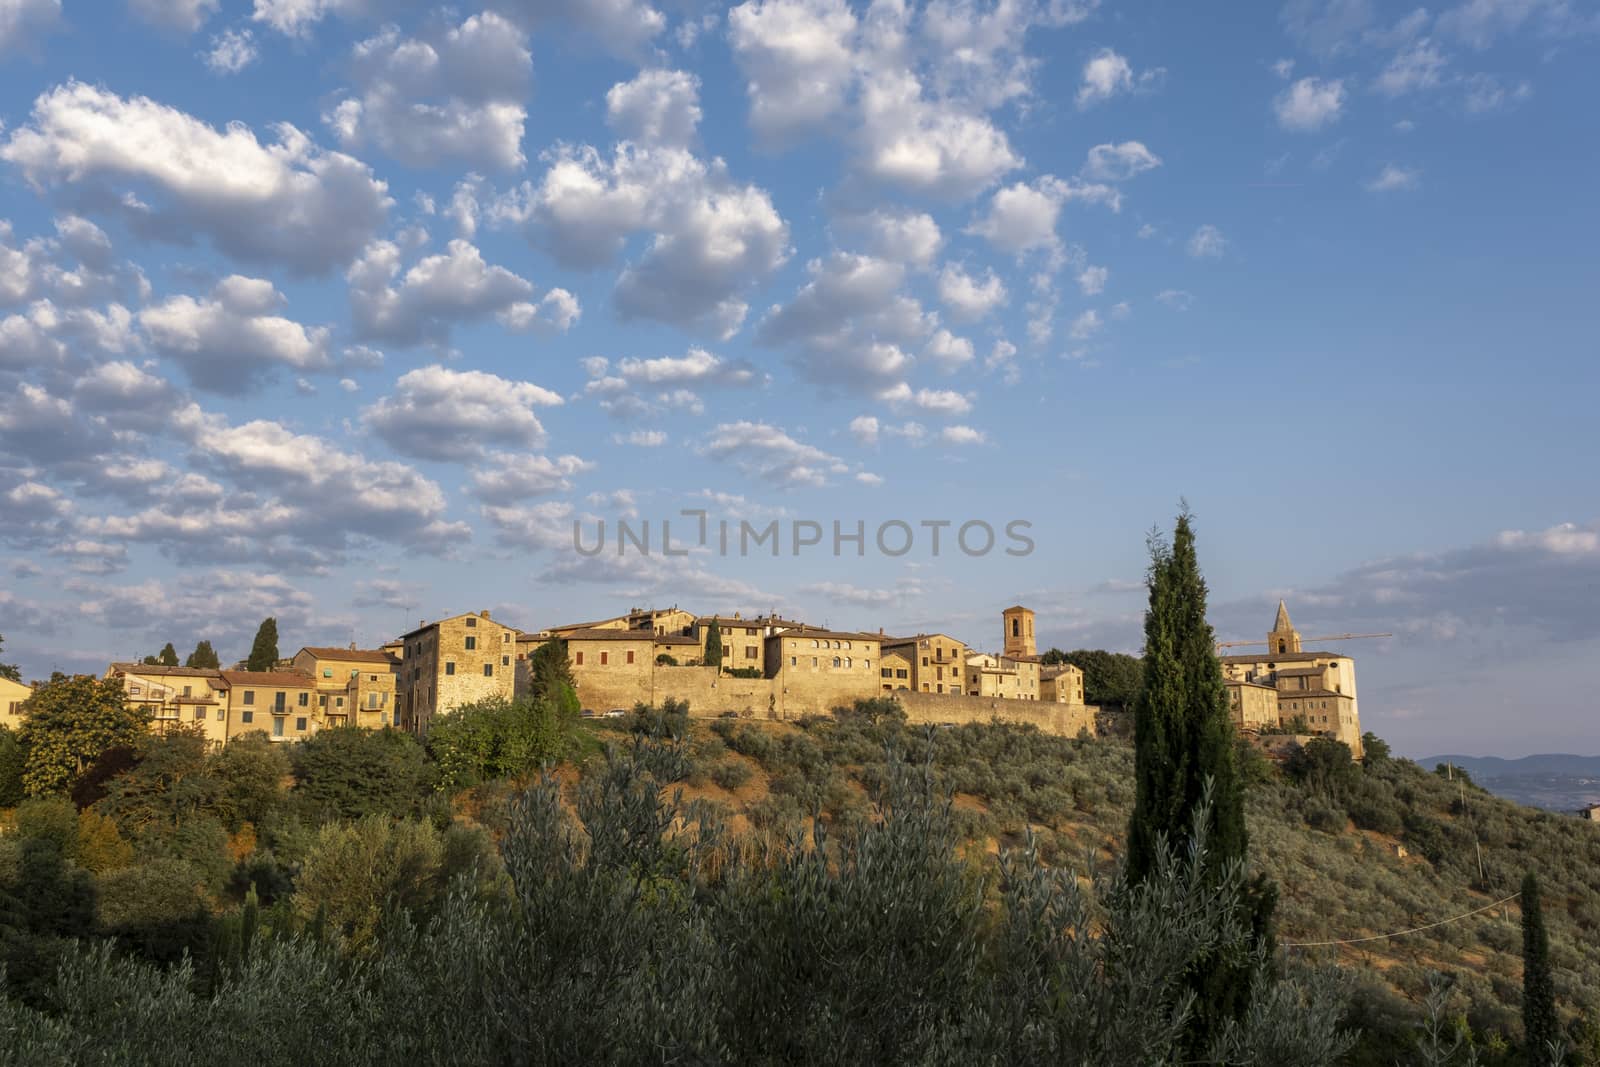 Bettona is an ancient town and comune of Italy, in the province of Perugia in central Umbria by Tjeerdkruse